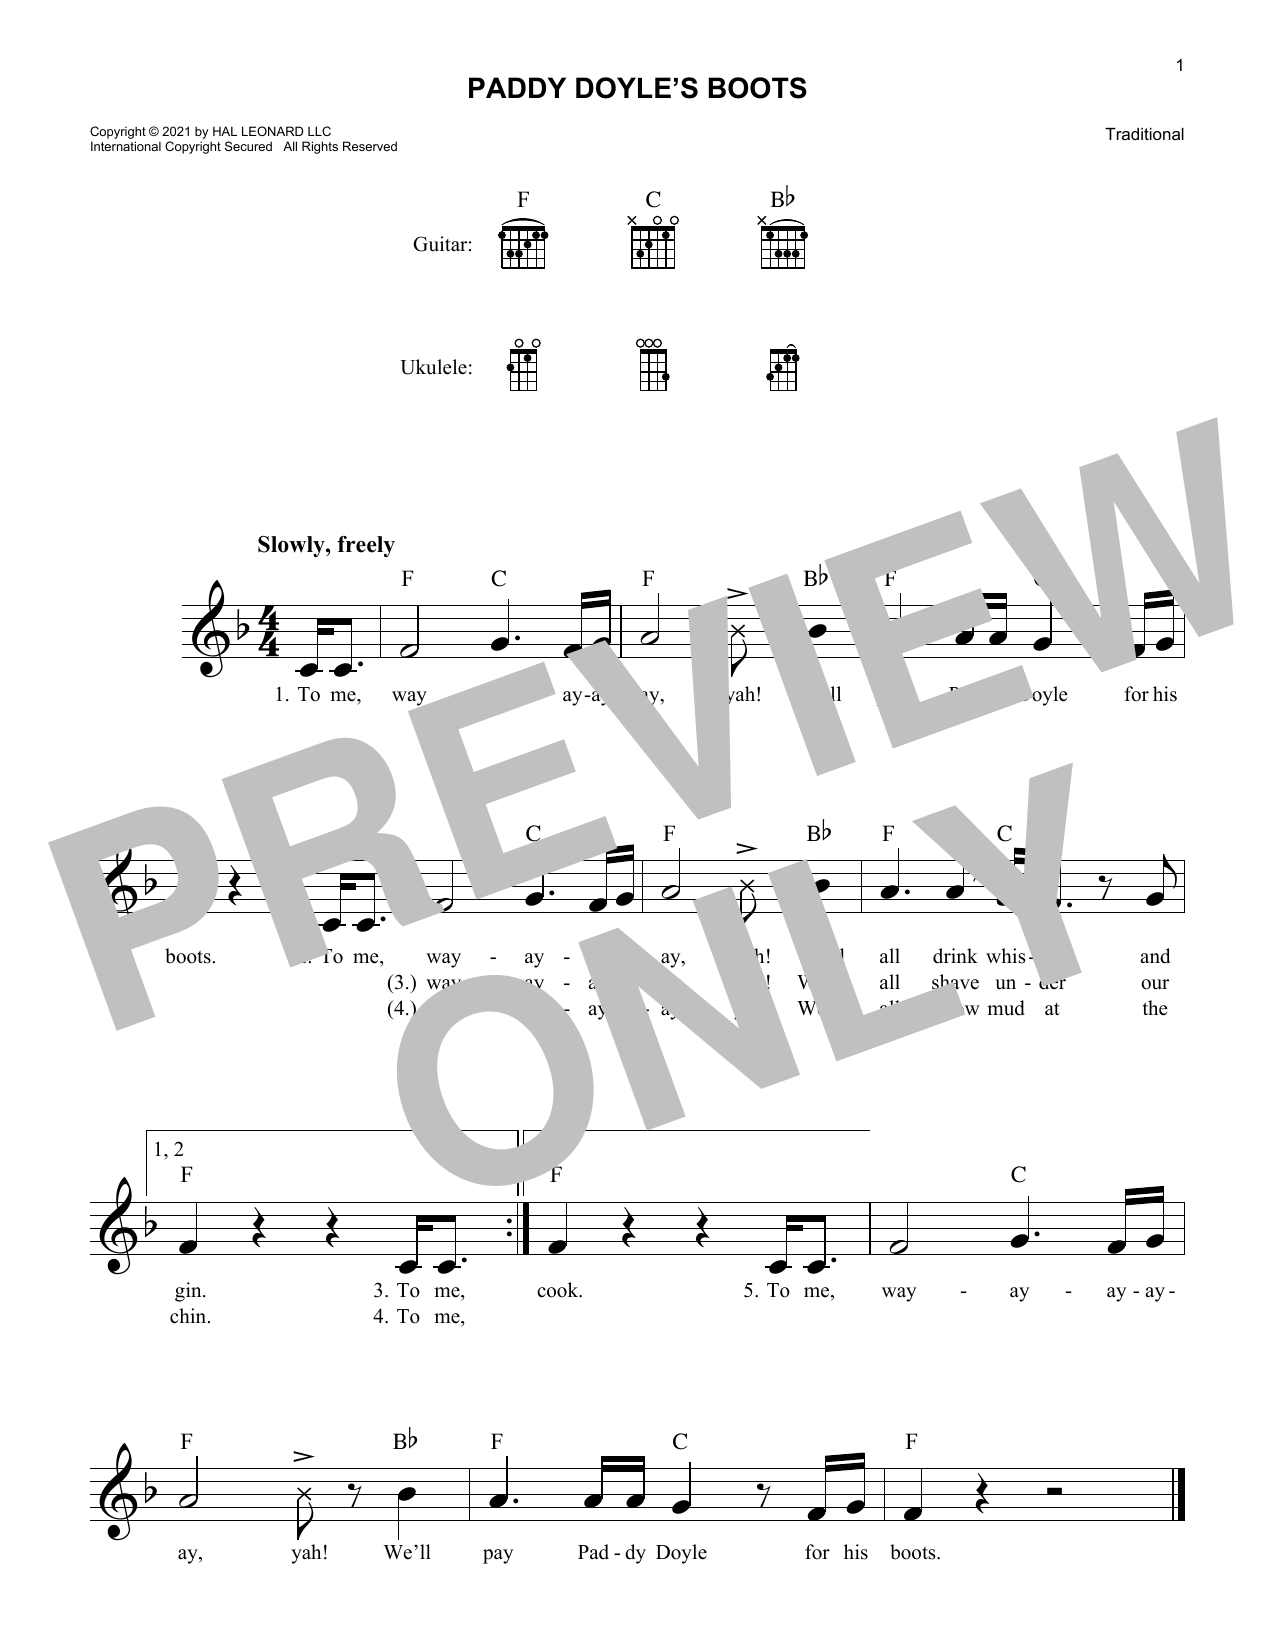 Download Traditional Paddy Doyle's Boots Sheet Music